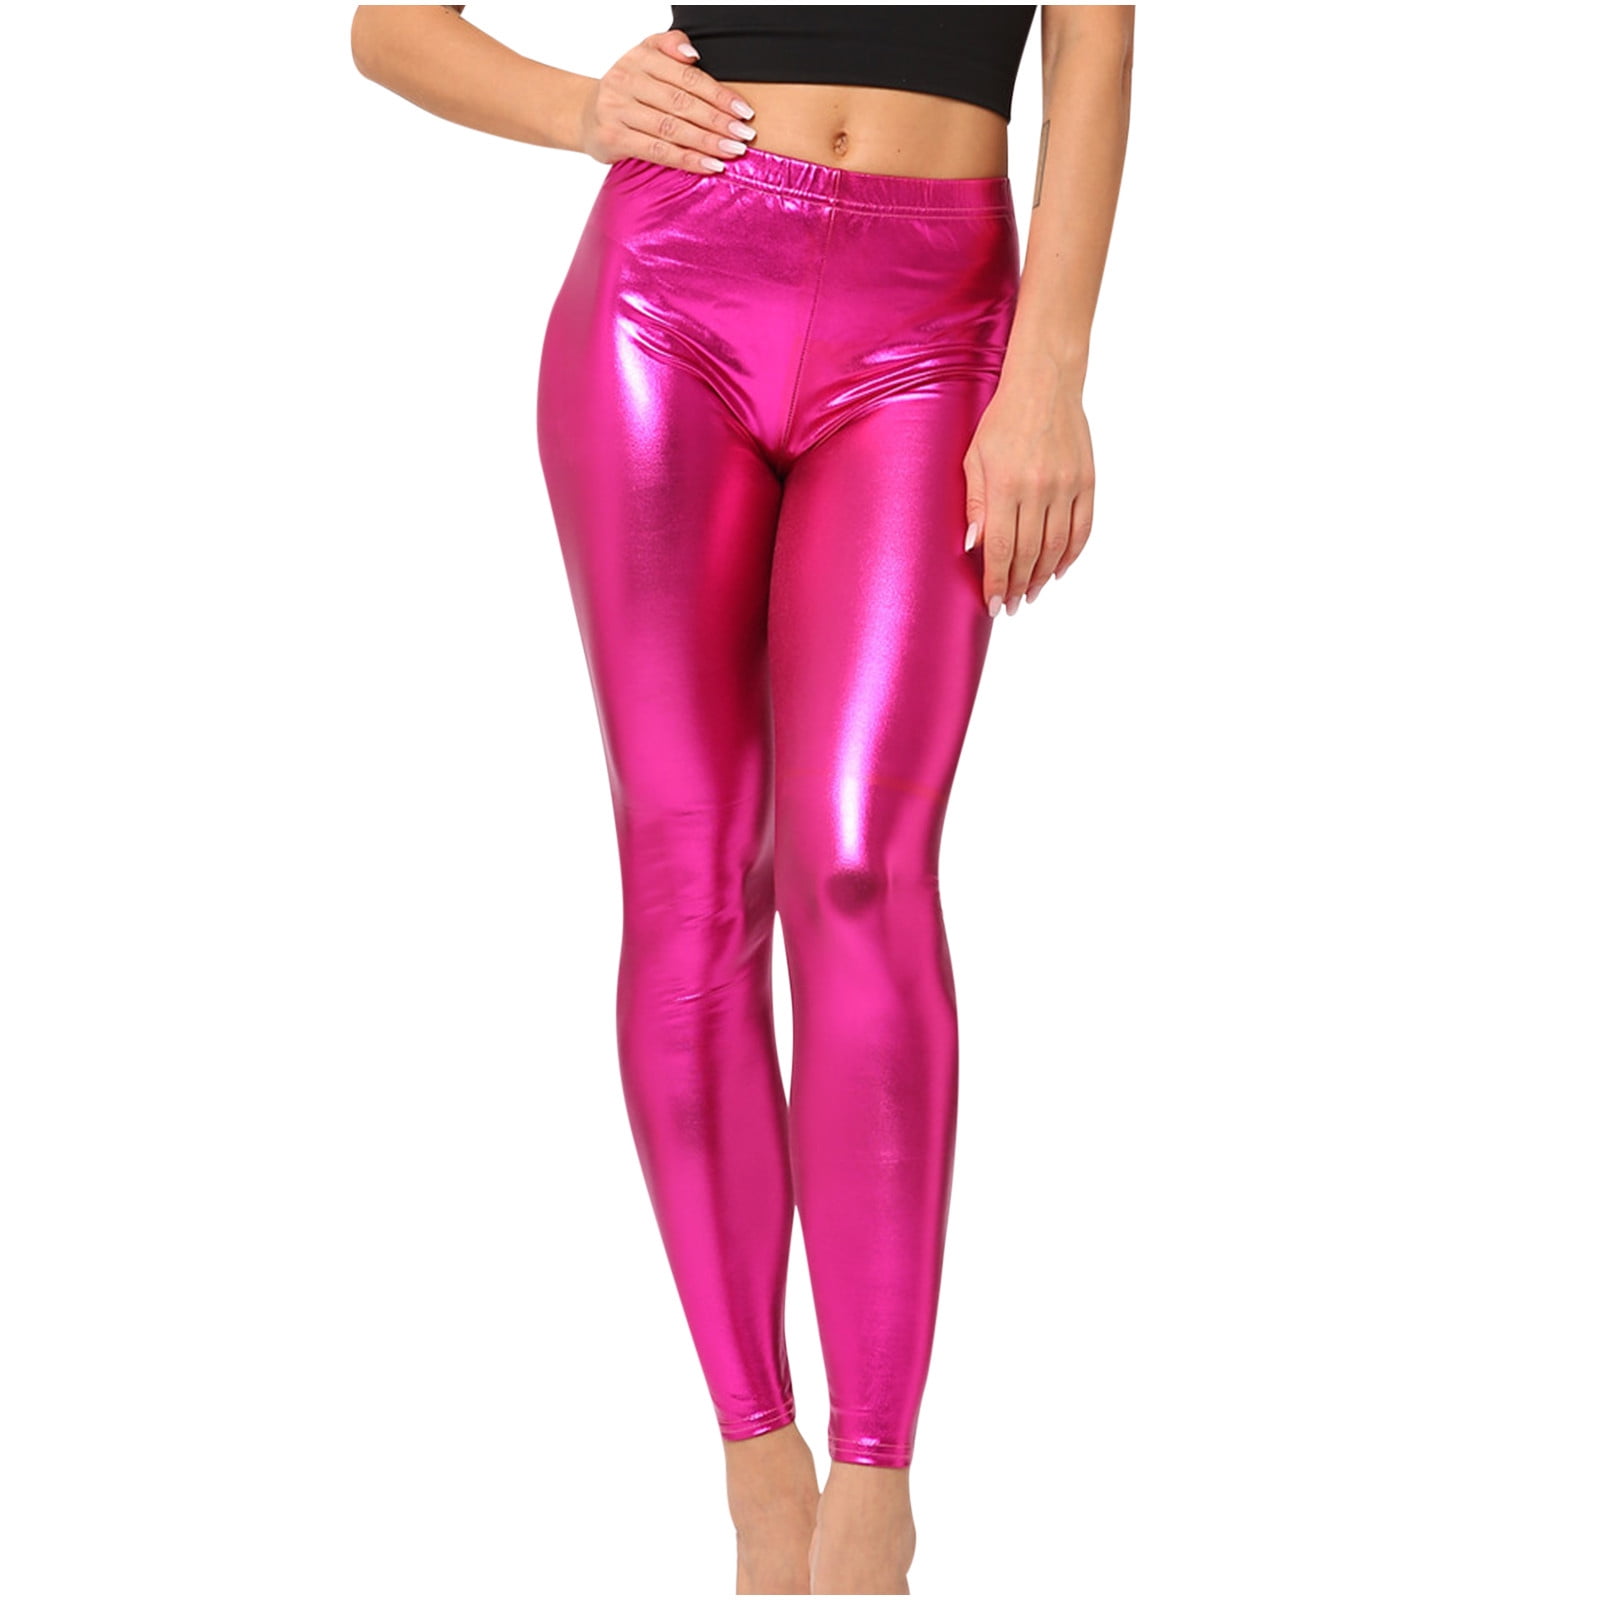 YYDGH Women's Shiny Metallic Leggings Sexy High Gloss Skinny Pants Faux  Leather Stretch Shaping Tights Trousers Pink XL 